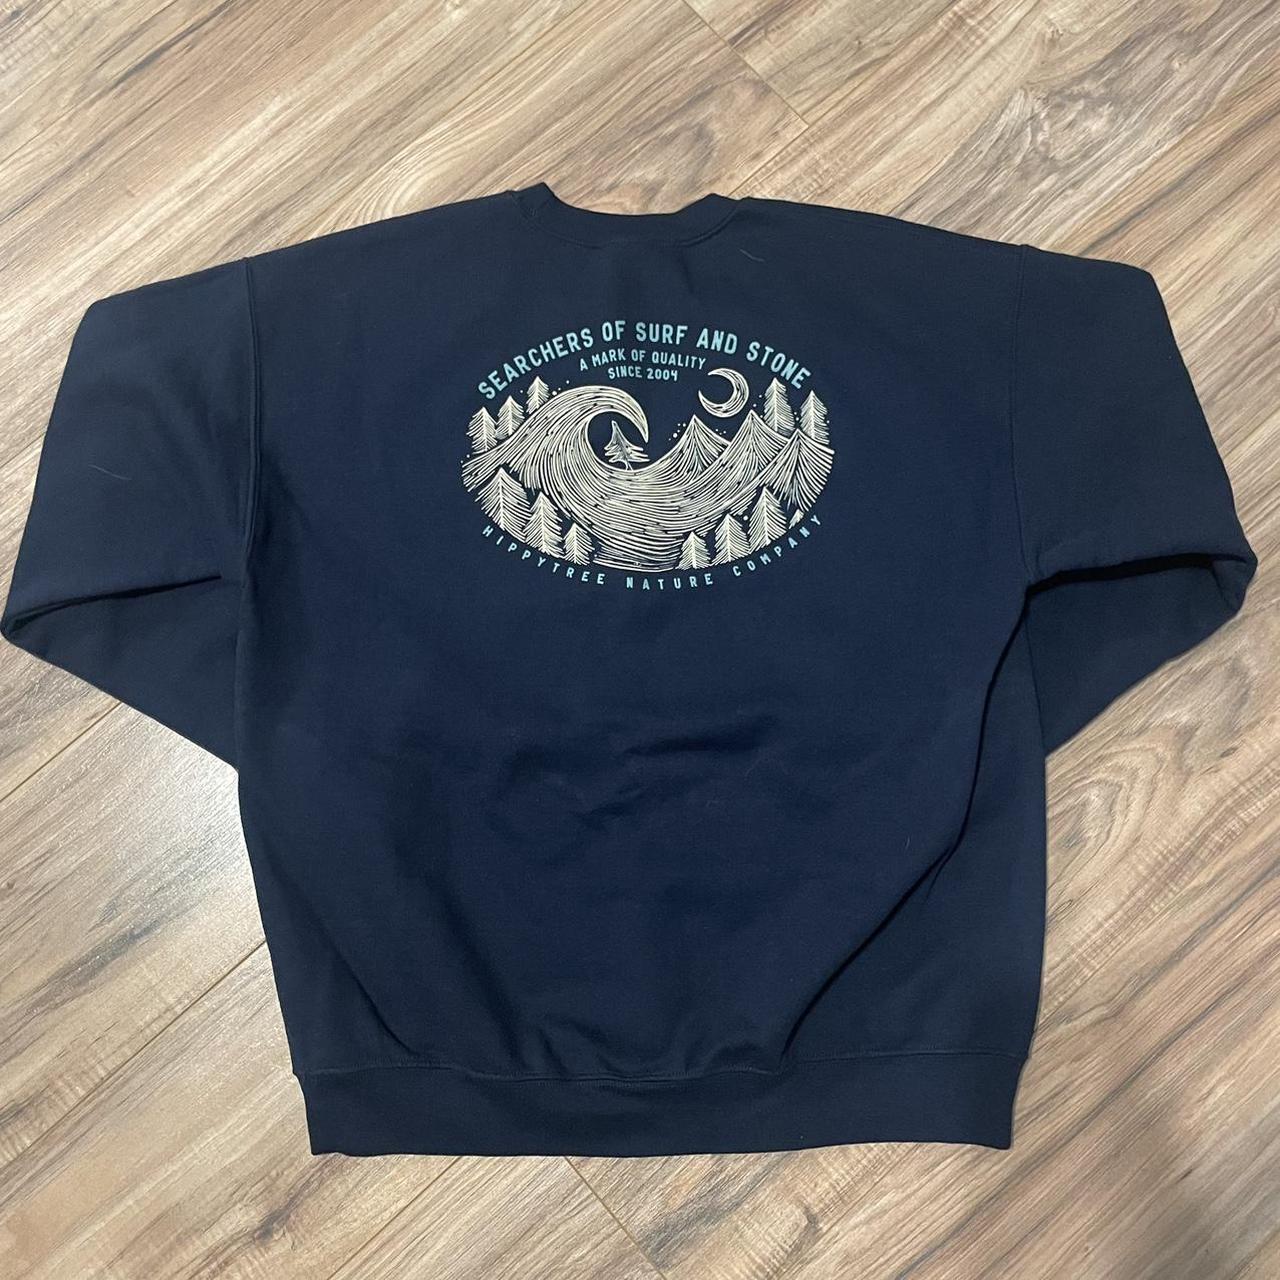 Navy HippyTree Surf and Stone Crewneck! Great... - Depop